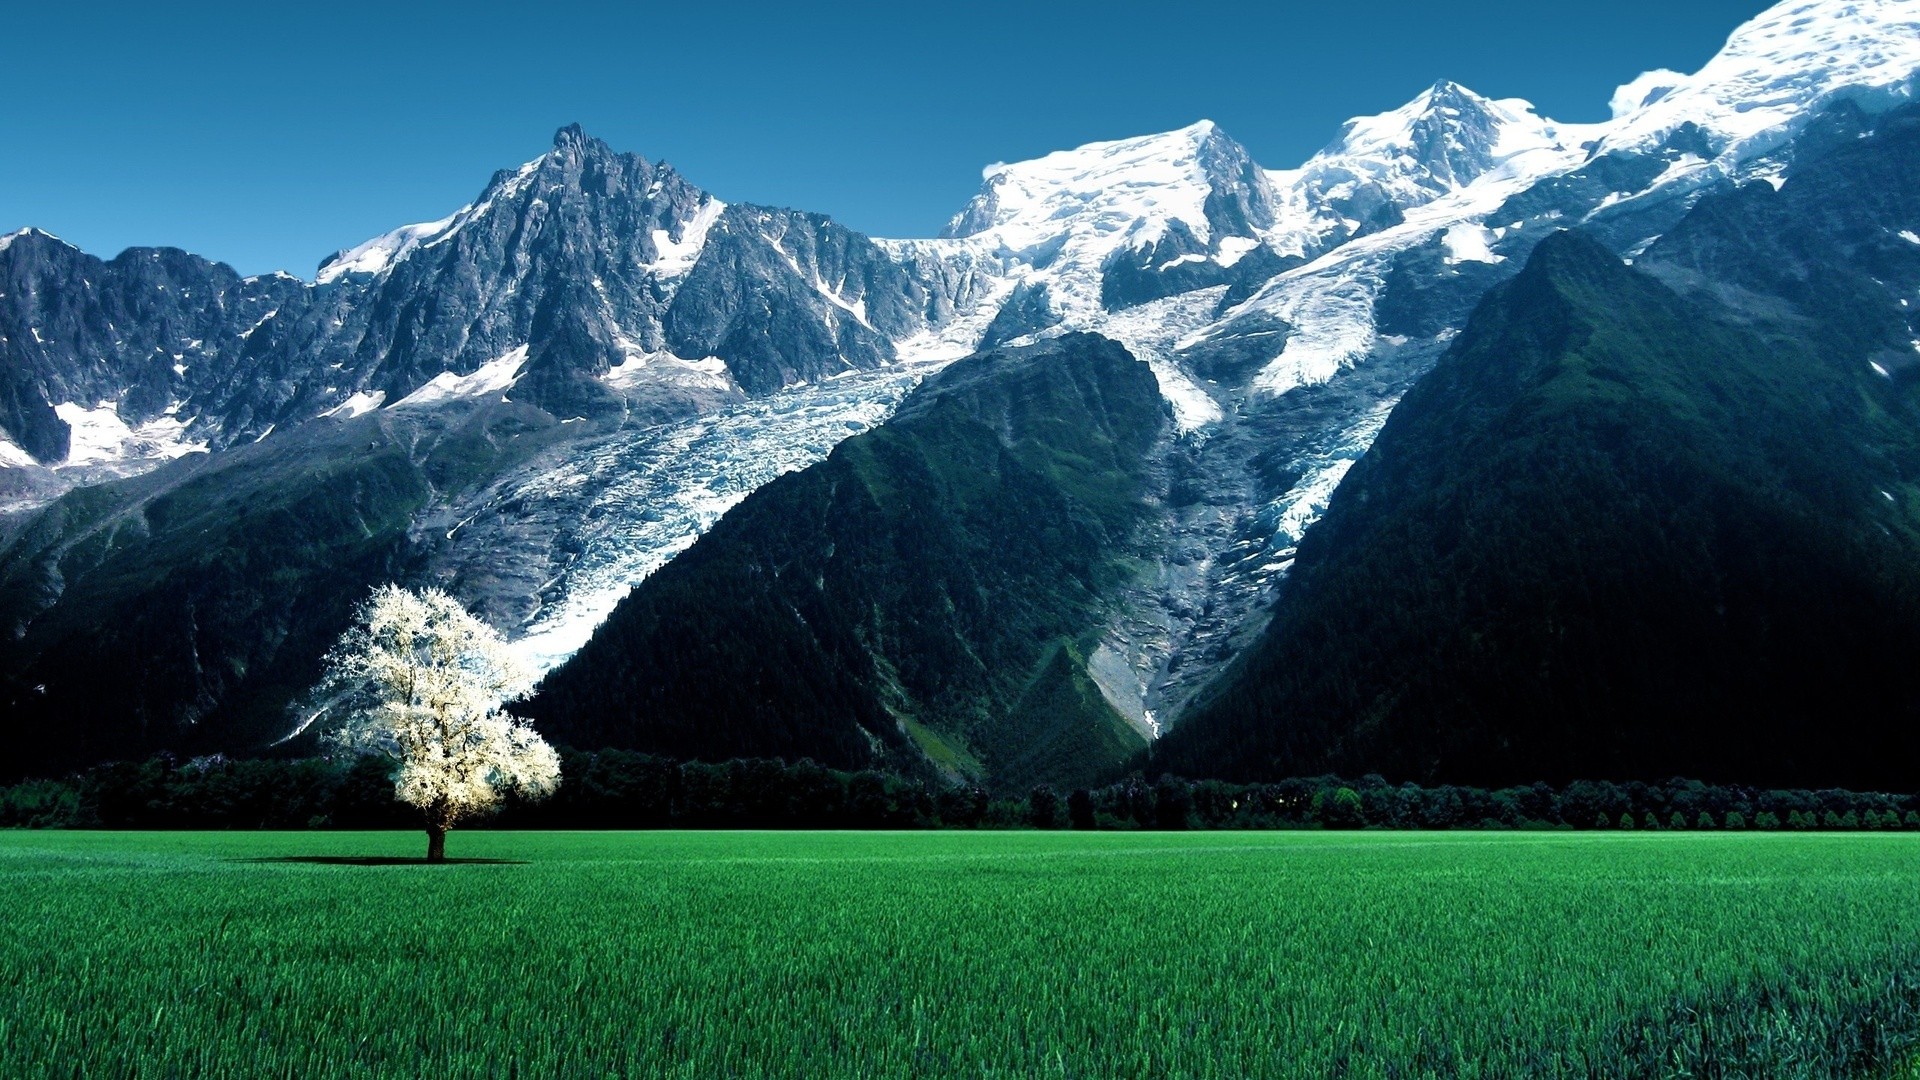 Nature Landscape Trees Switzerland Alps Swiss Alps Field Mountains Snowy Peak Grass Forest Blossoms 1920x1080